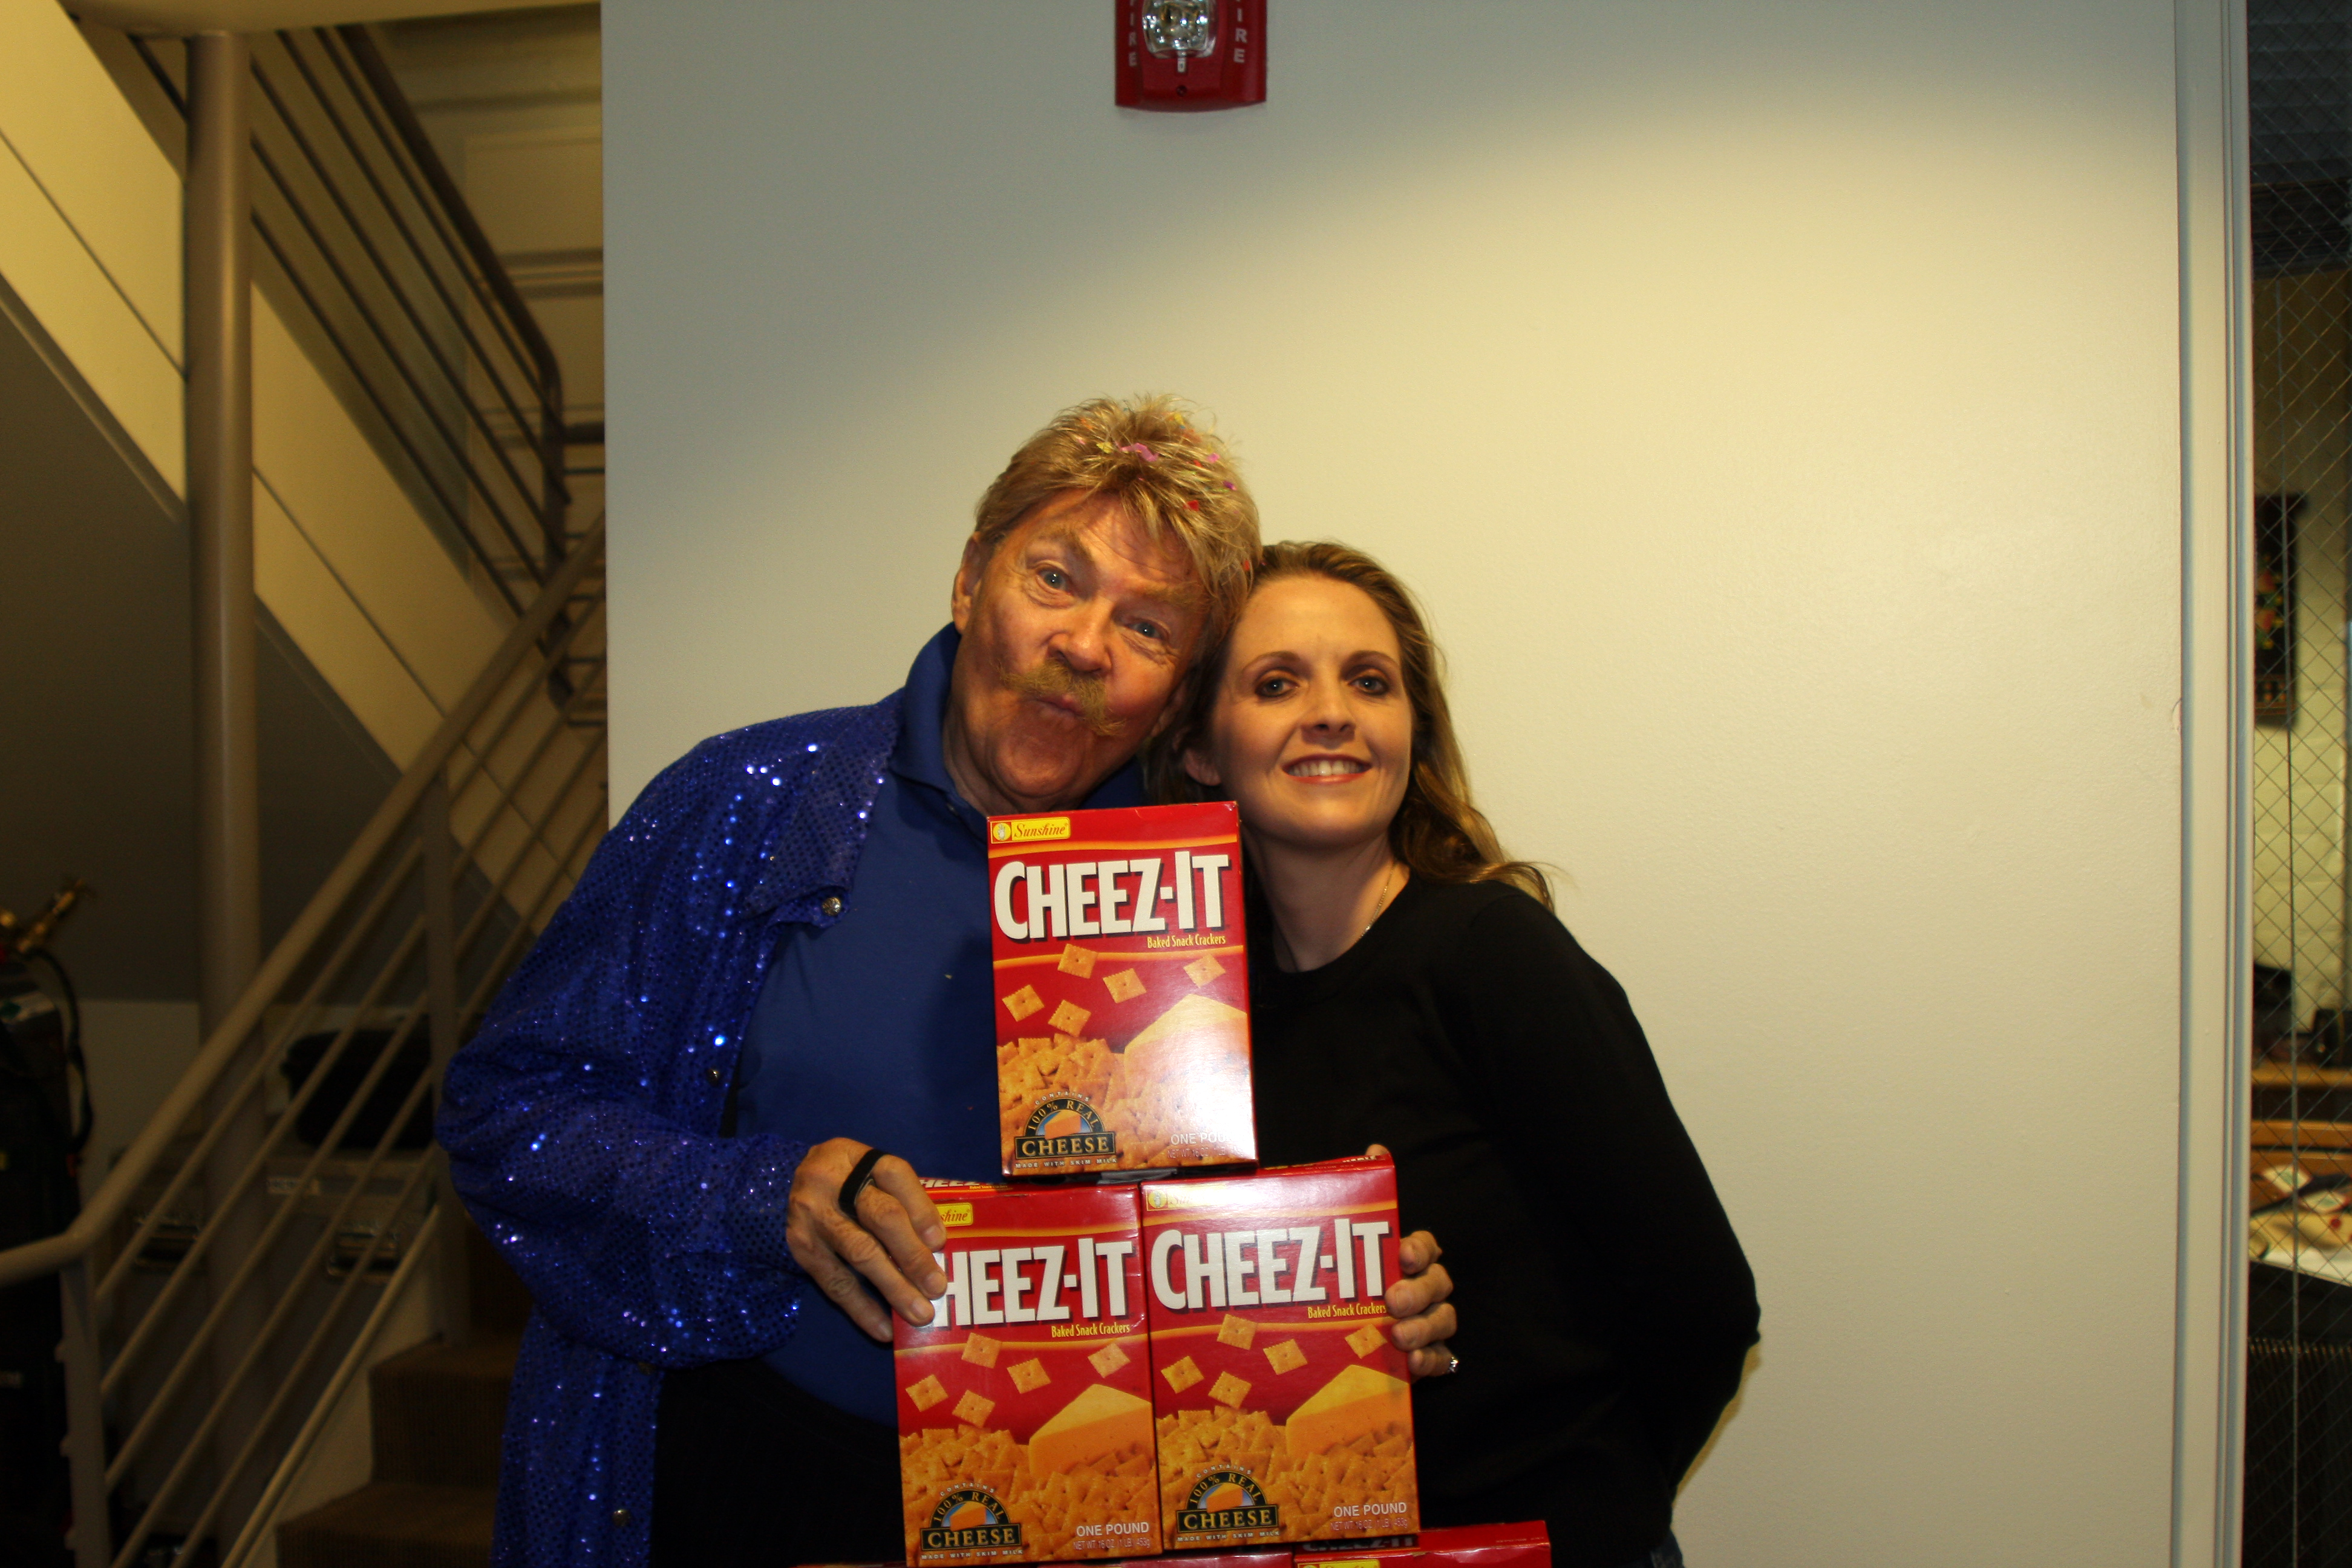 Producing and Talent Booking at GSN...And taking a break for pictures with Rip Taylor! Wheres the confetti?